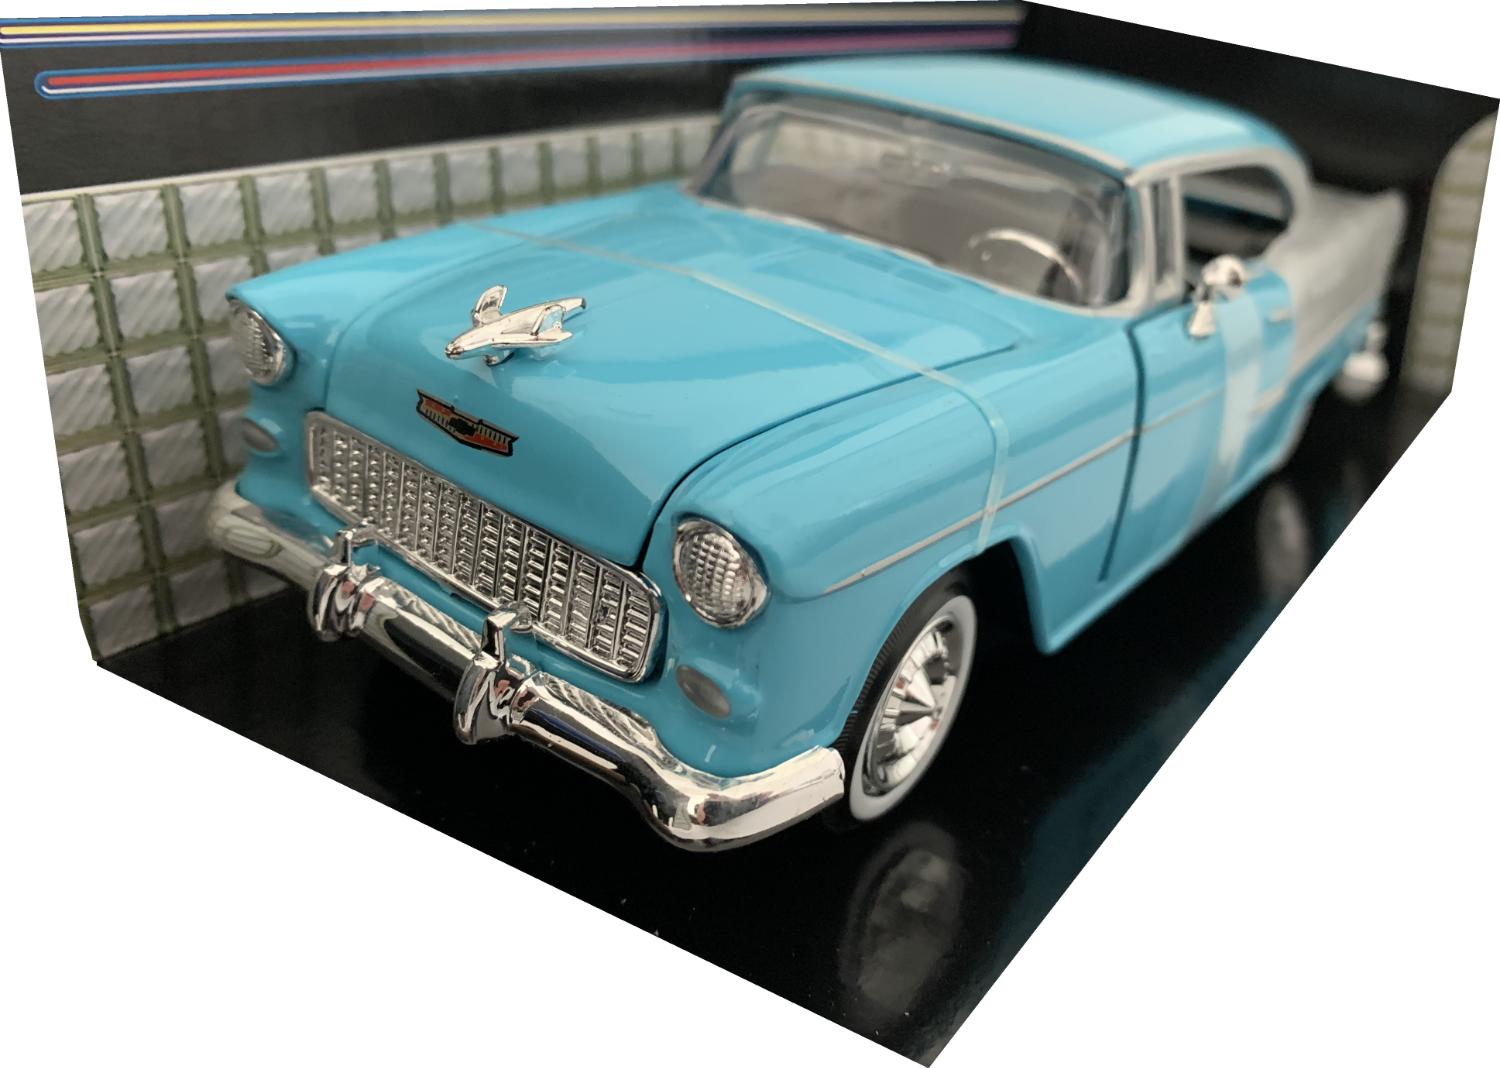 Chevrolet Bel Air Hard Top 1955 in blue and silver 1:24 scale model from Motormax